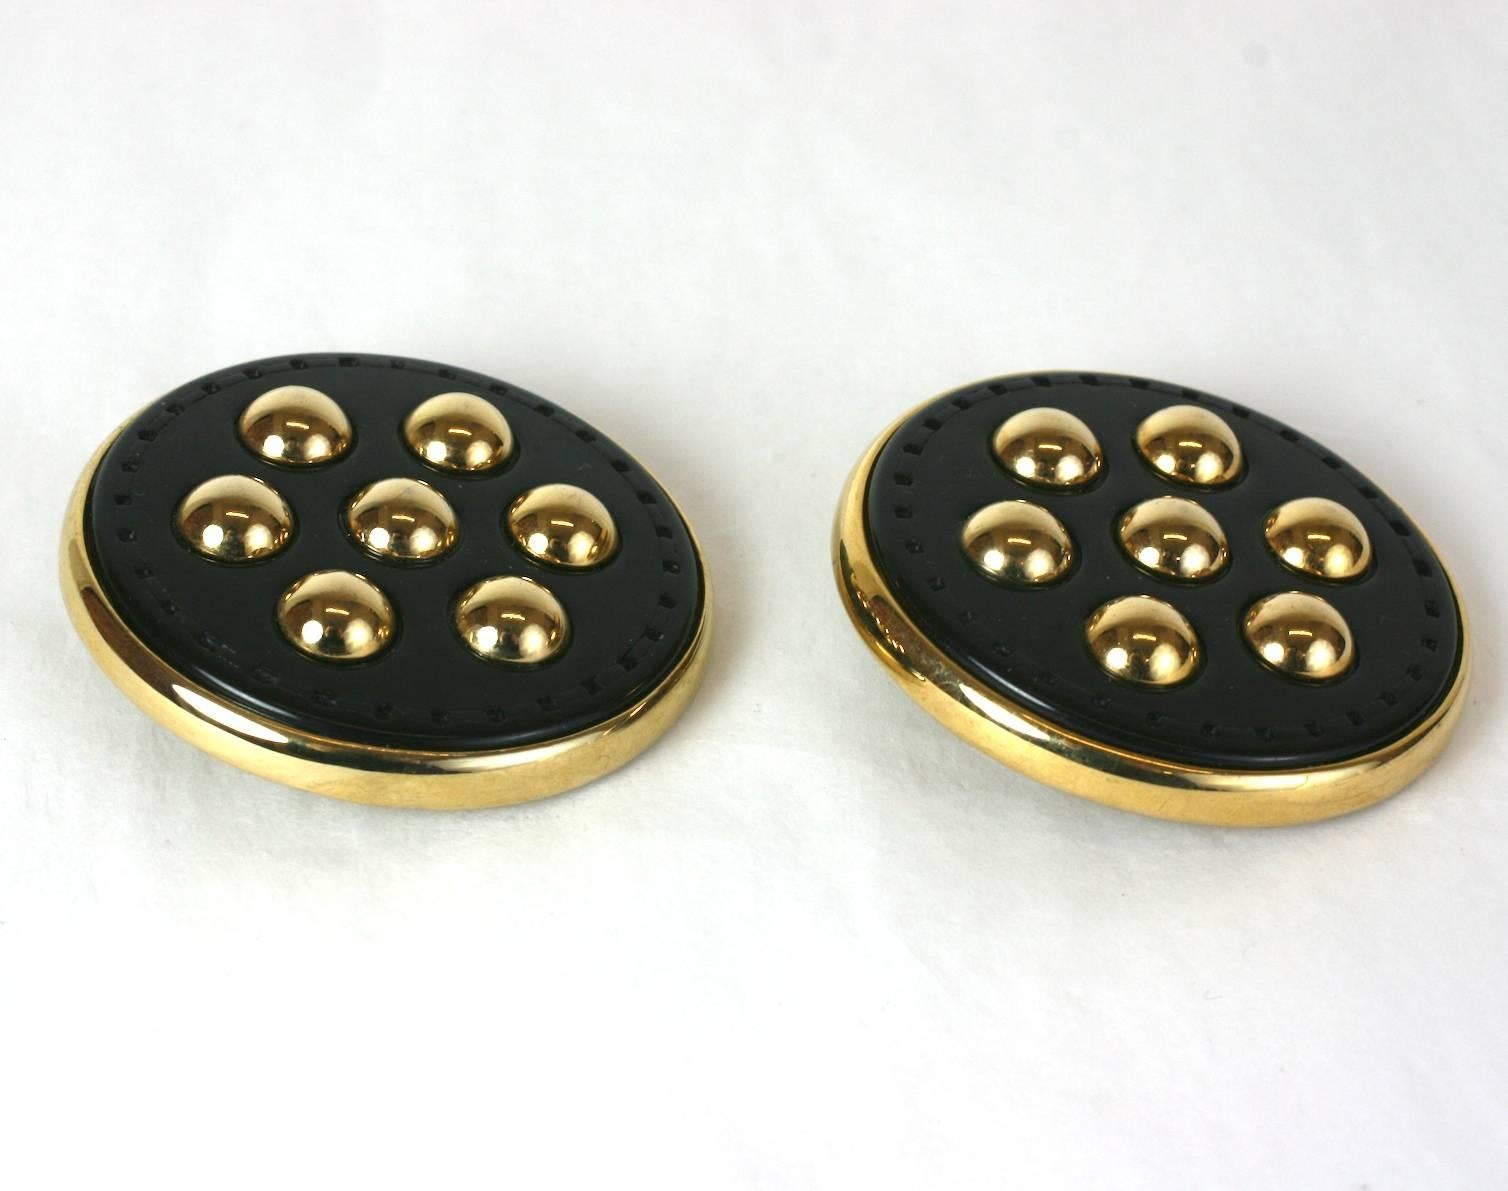 Massive Button Earrings from the 1980's. Large gilt discs are set with top stitched navy vinyl 